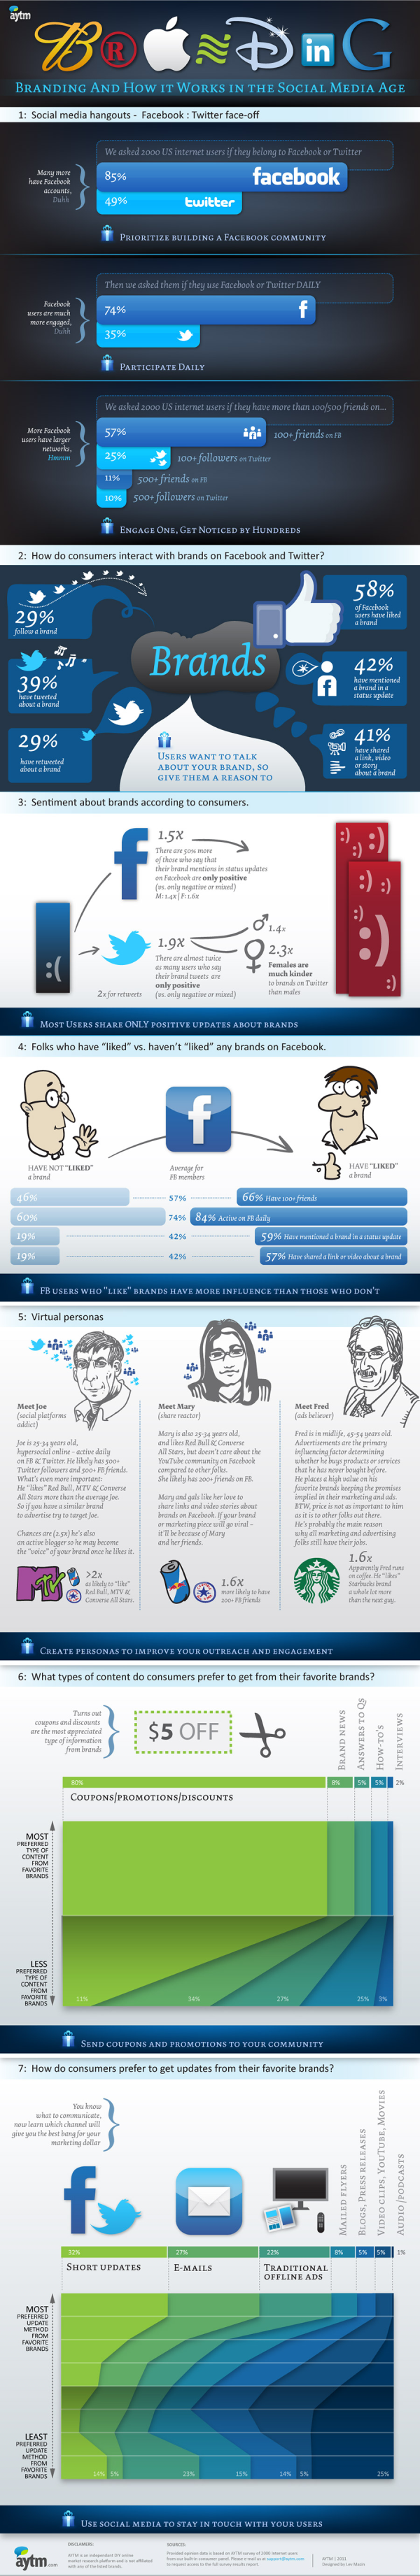 21 Captivating Social Media Stats: How People Interact With Brands [INFOGRAPHIC]